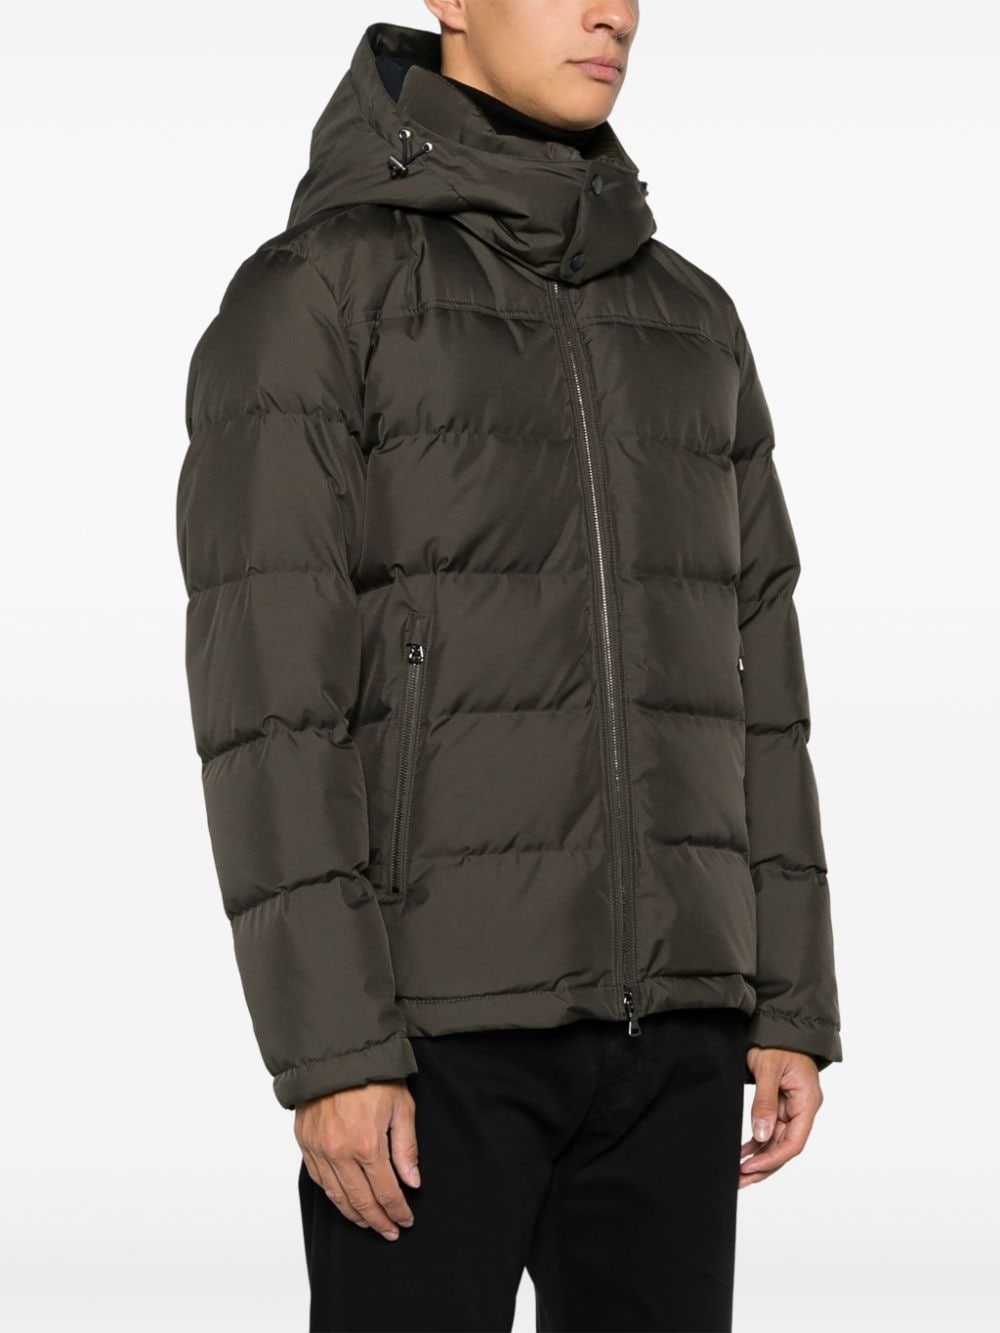 Save the Sea down jacket - 3